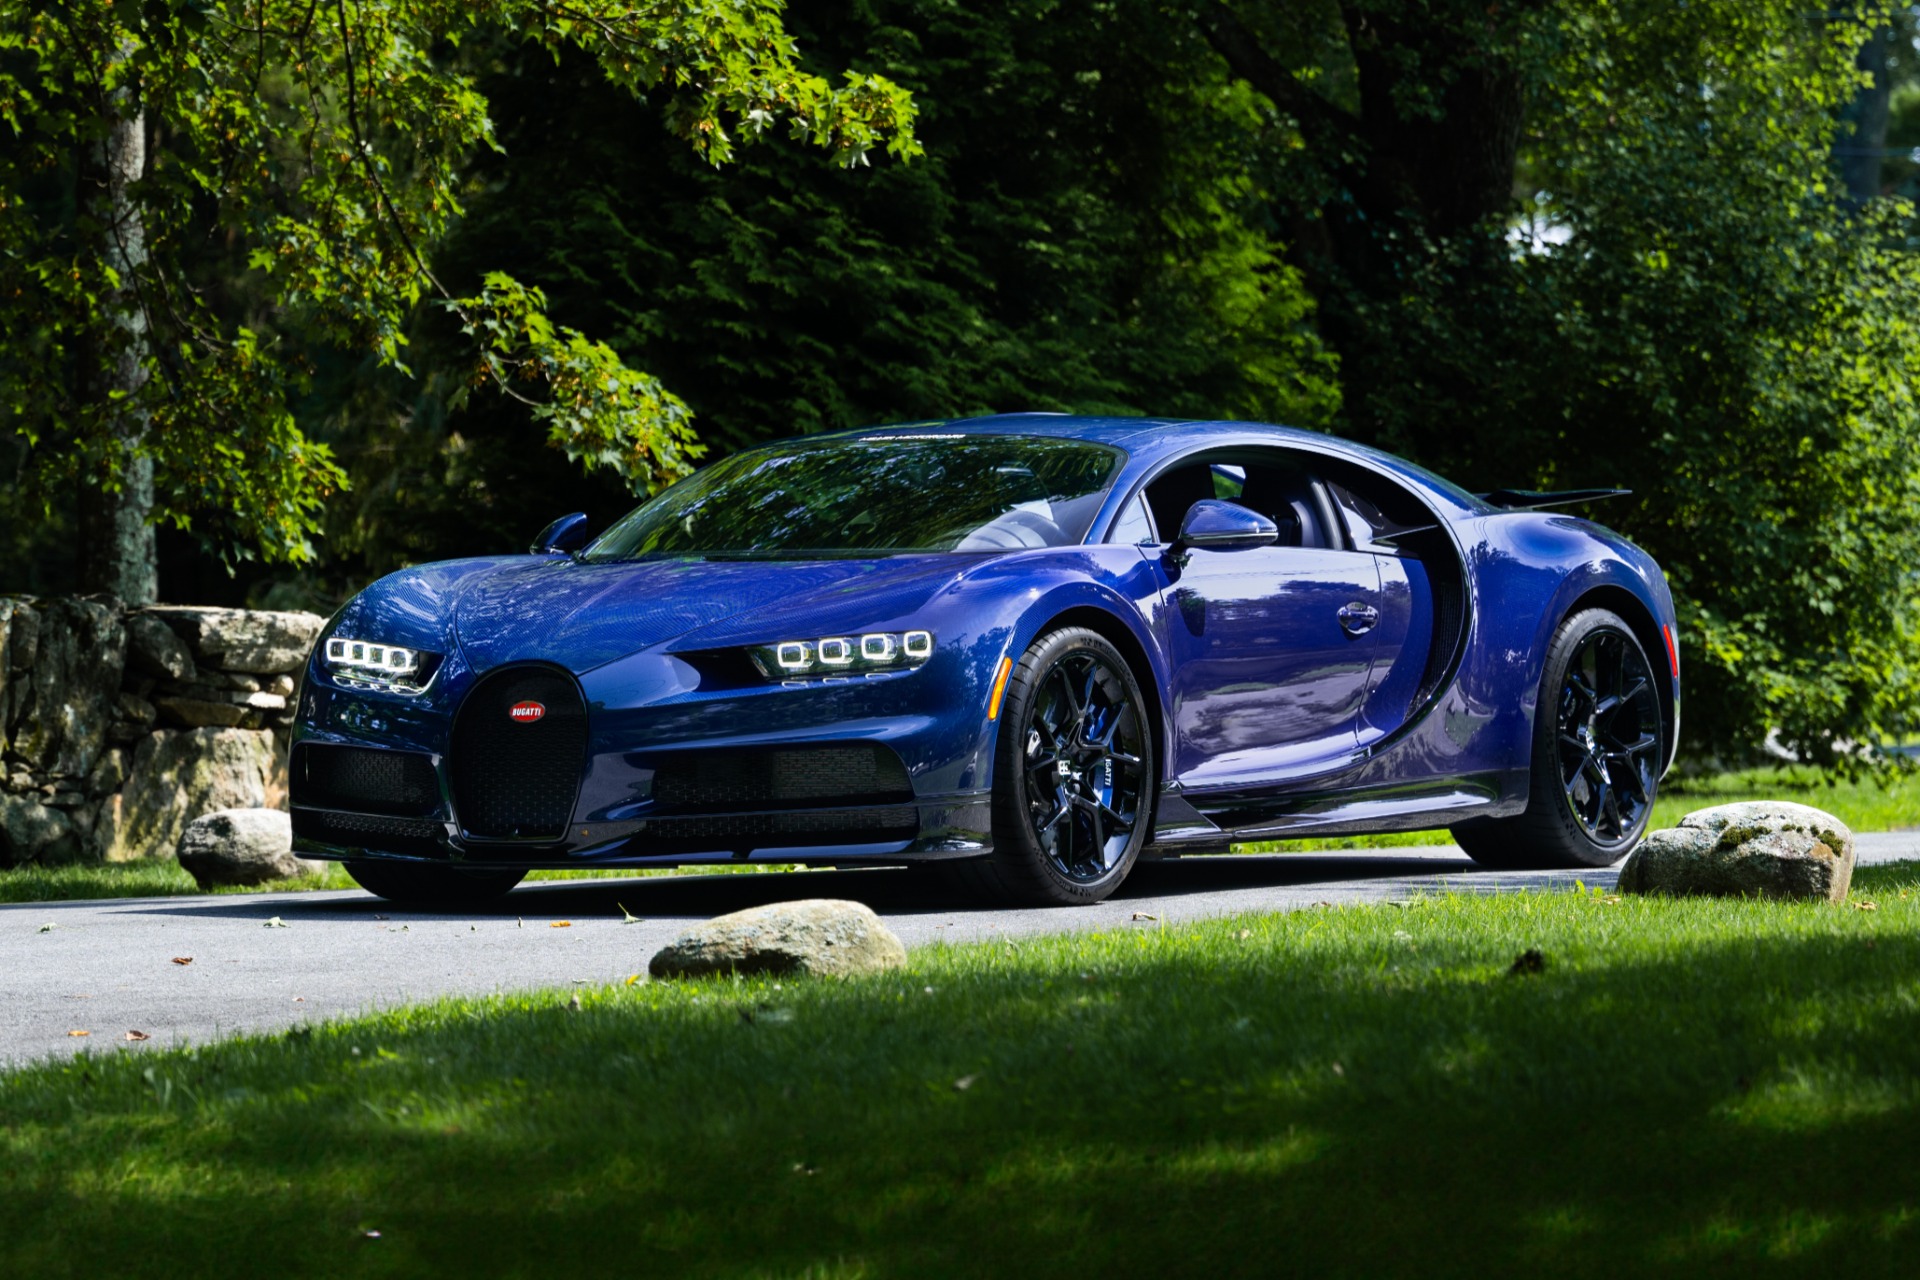 Used 2018 Bugatti Chiron for sale $3,475,000 at Bentley Greenwich in Greenwich CT 06830 1